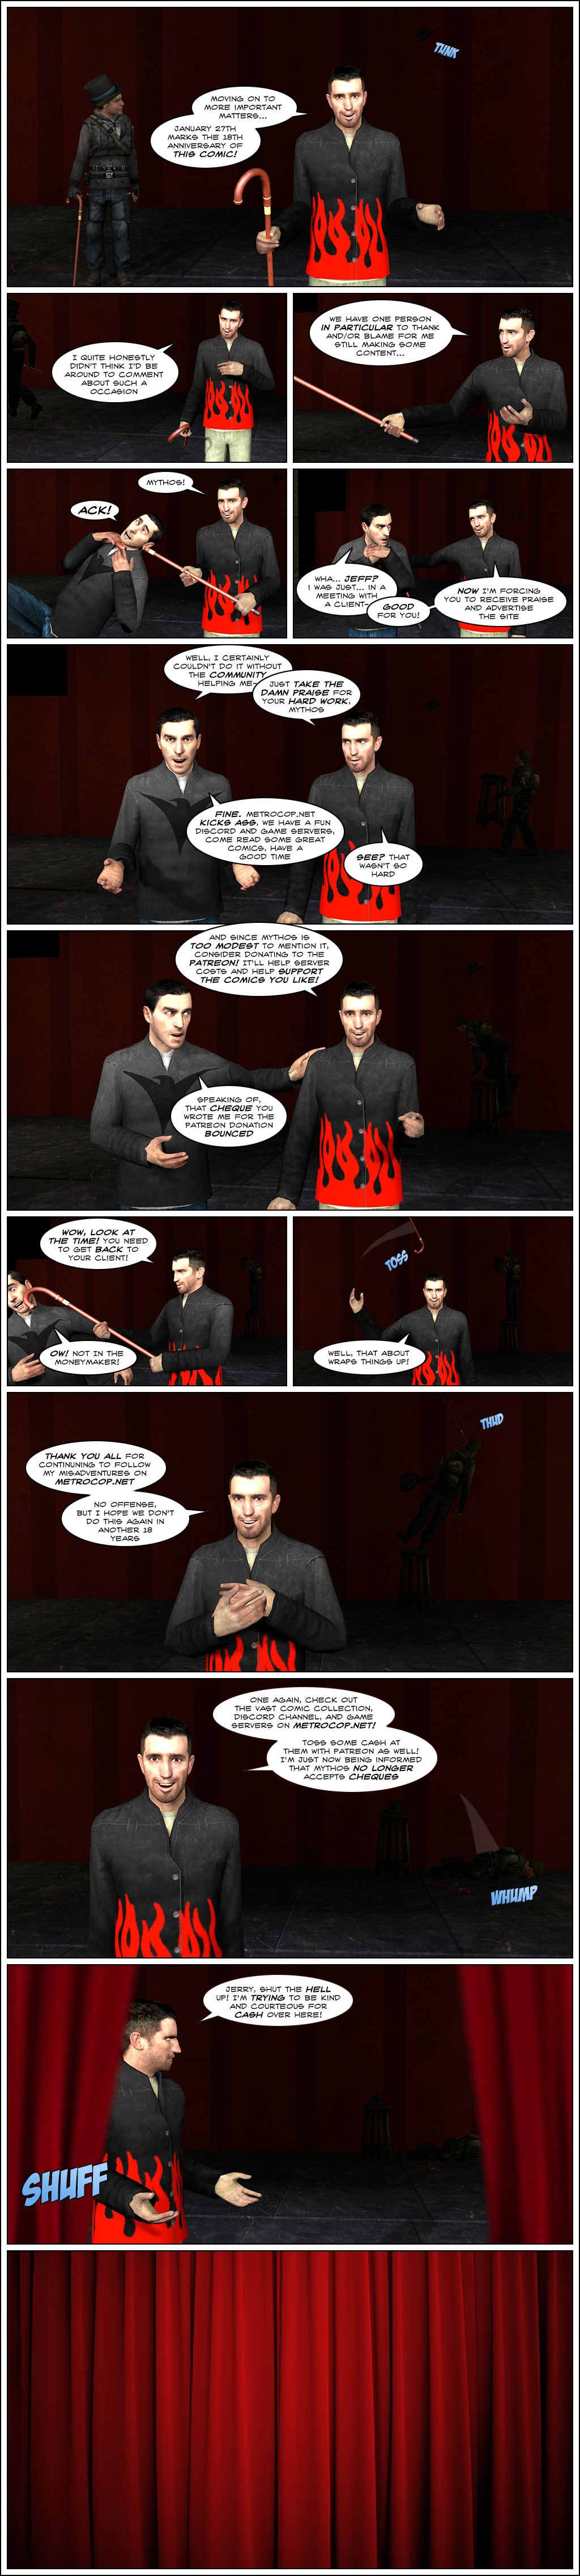 Jeff's top hat hits someone as Jeff says moving on to more important matters, January 27th marks the eighteenth anniversary of this comic. Jeff admits he quite hoesntly didn't think he'd be around to comment about such a occasion, then adds that they have one person in particular to thank and/or blame for him still making content. He reaches behind the curtain with his cane, then pulls Mythos into view through the neck, making him gasp in pain. Jeff introduces Mythos, who says he was just in a meeting with a client. Jeff interrupts him to say good for you, now he's forcing him to receive praise and advertise the site. Mythos starts to say he certainly couldn't do it without the community helping him, but Jeff cuts him off and tells him to just take the damn praise for his hard work. Mythos says fine, Metrocop.net kicks ass, they have a fun Discord and game servers, come read some great comics, have a good time. Jeff tells him see, that wasn't so hard, then adds that since Mythos is too modest to mention it, consider donating to the Patreon, it'll help server costs and help support the comics you like. Mythos takes the chance to tell Jeff the cheque he wrote him for the Patreon donation bounced. Jeff exclaims wow, look at the time, Mythos needs to get back to his client and pushes him out with the cane. As it hits him in the face, Mythos groans ow, not in the moneymaker. As Jerry stands behind him in the dark on top of a stool, Jeff tosses his cane away and says that about wraps things up. The cane hits Jerry in the head while Jeff thanks everyone for continuing to follow his misadventures on Metrocop.net, then adds no offense, but he hopes they don't do this again in another eighteen years. As Jerry falls to the ground unconscious, Jeff says to once again check out the vast comic collection, Discord channel and game servers on Metrocop.net, and to toss some cash at them with Patreon as well, he's just now being informed that Mythos no longer accepts cheques. As the curtain closes, Jeff shouts at Jerry to shut the hell up, he's trying to be kind and courteous for cash over there. The curtain closes. The end.